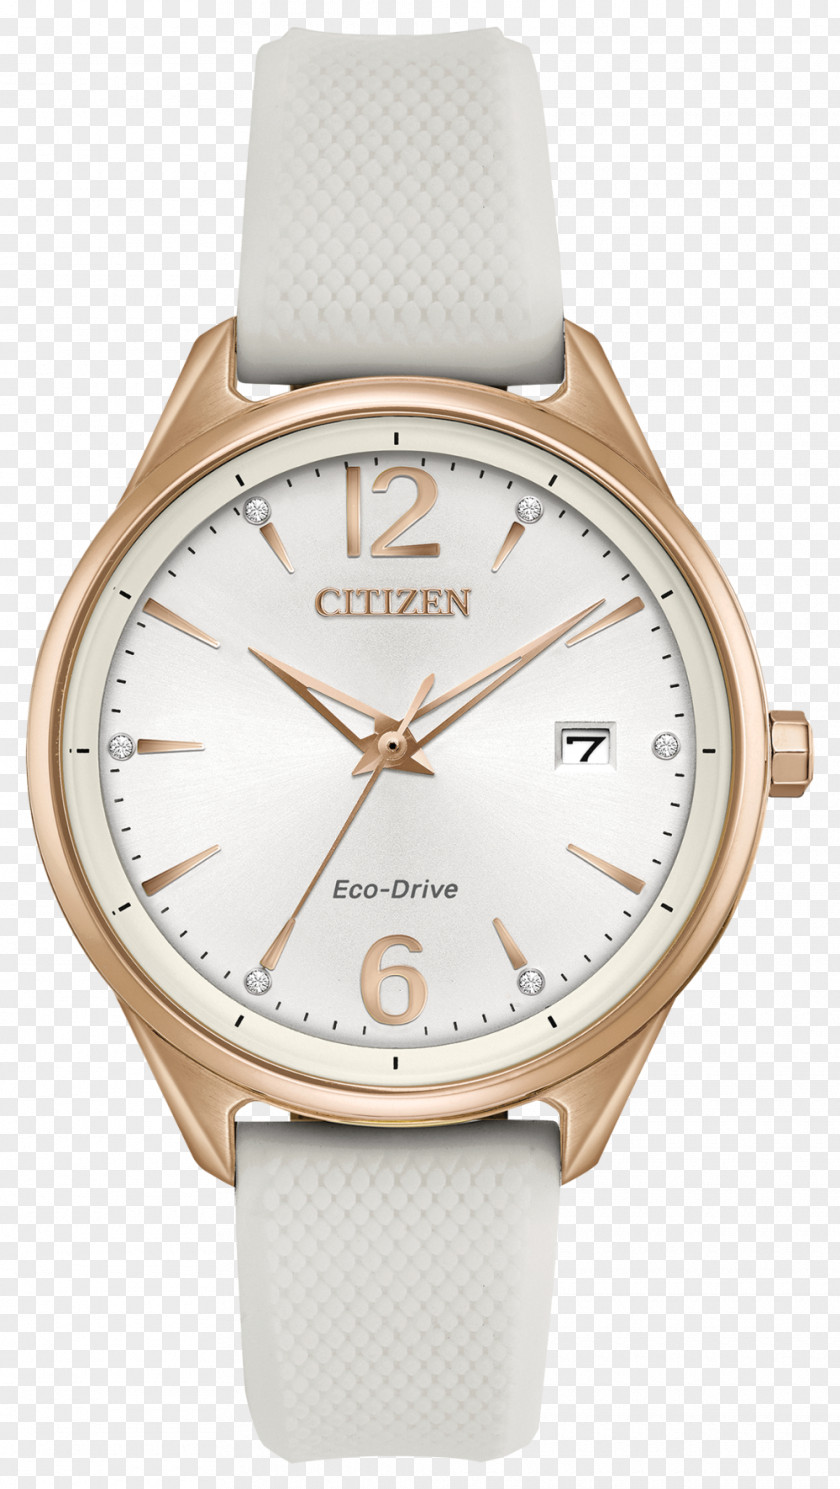 Watch Eco-Drive Citizen Holdings Strap PNG